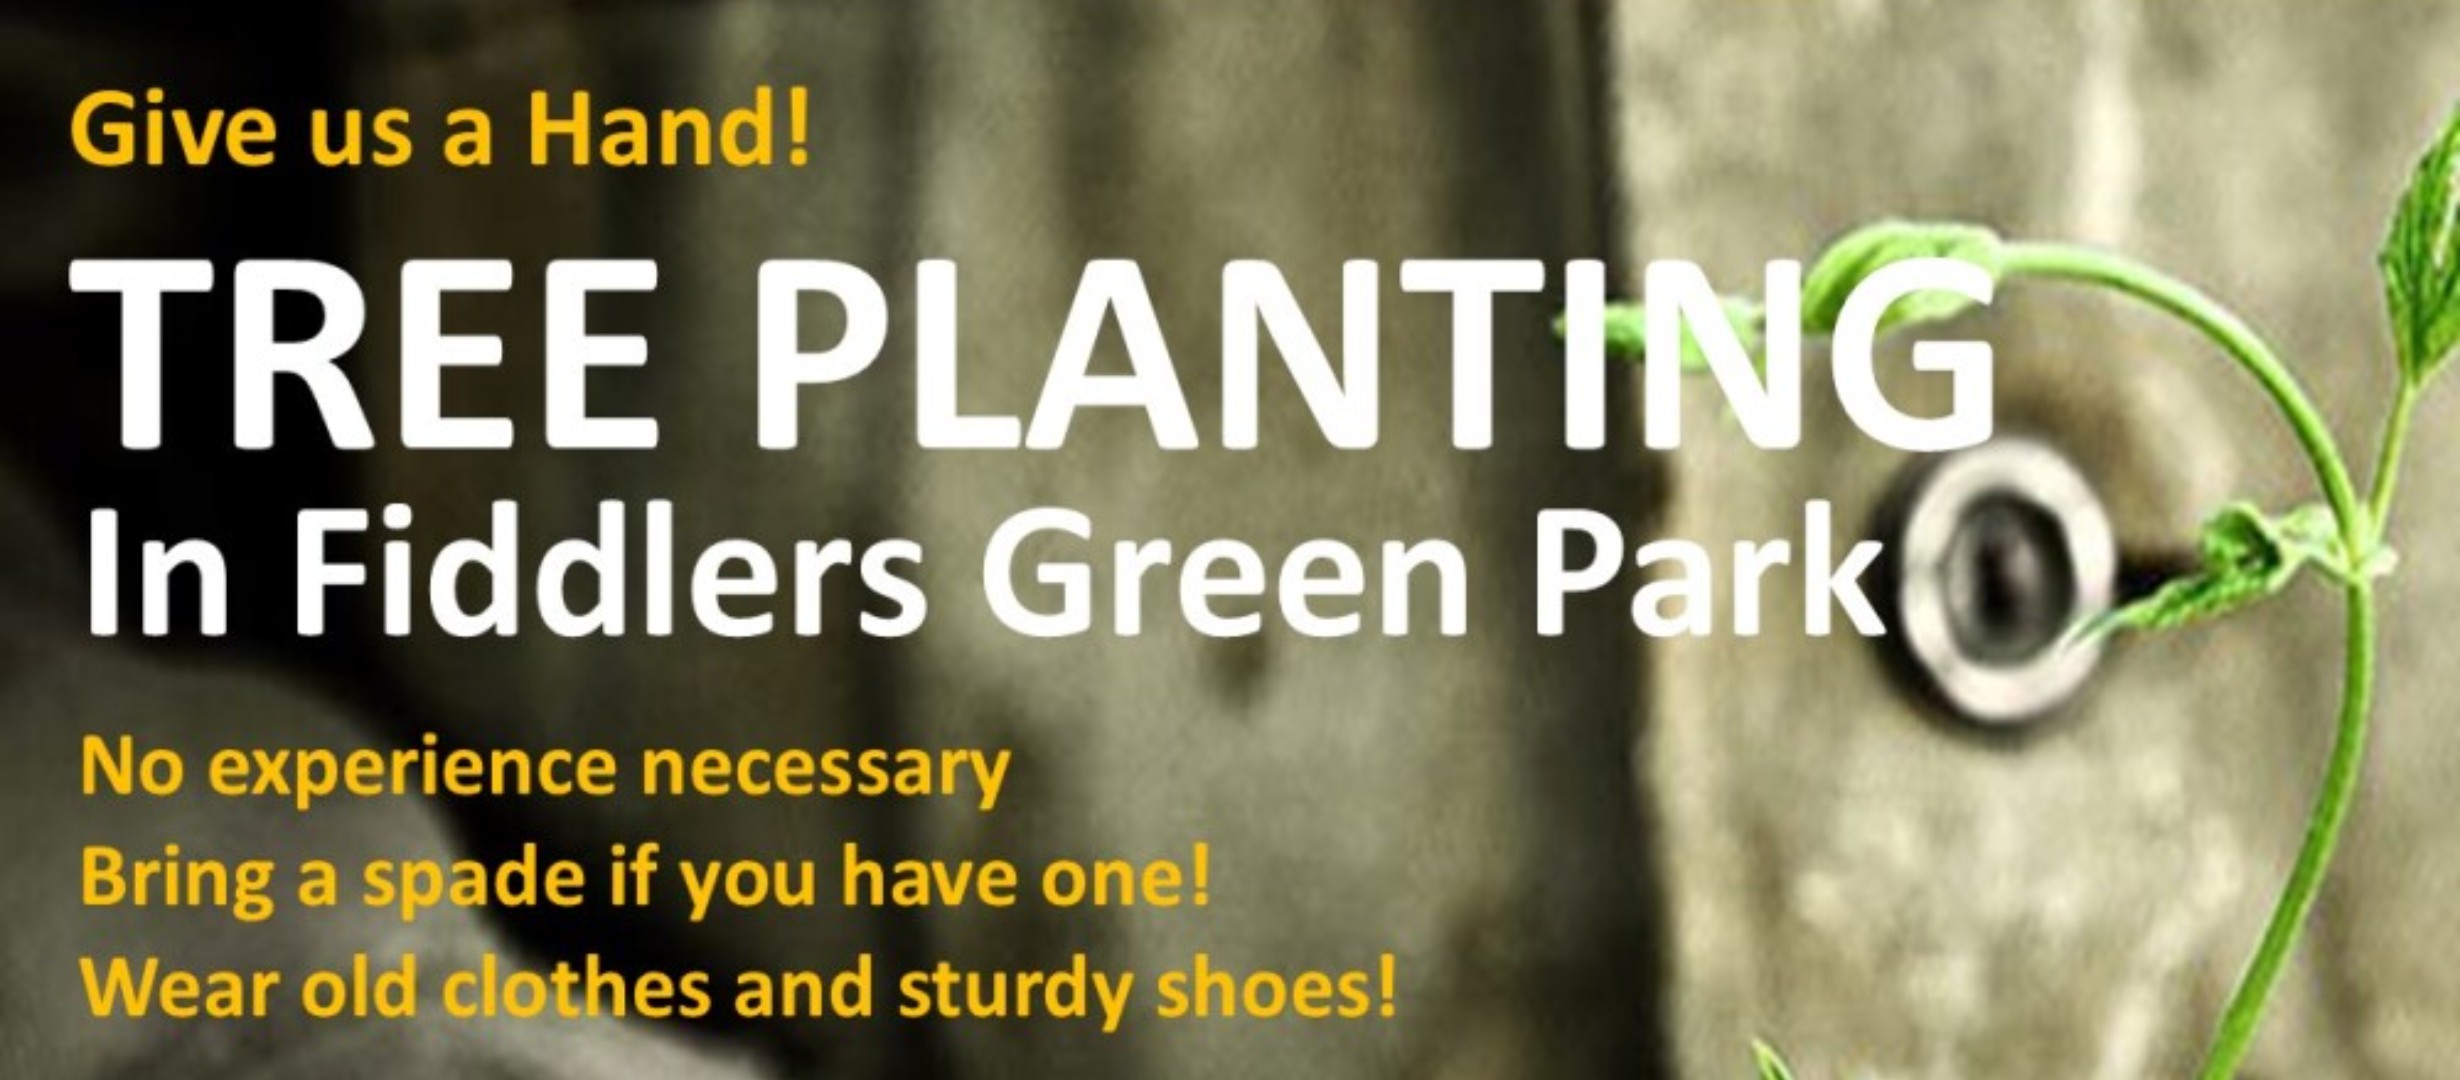 text reads 'give us a hand! Tree planting in Fiddlers Green Park. No experience necessary, bring a spade if you have one, wear old clothes and sturdy shoes!'